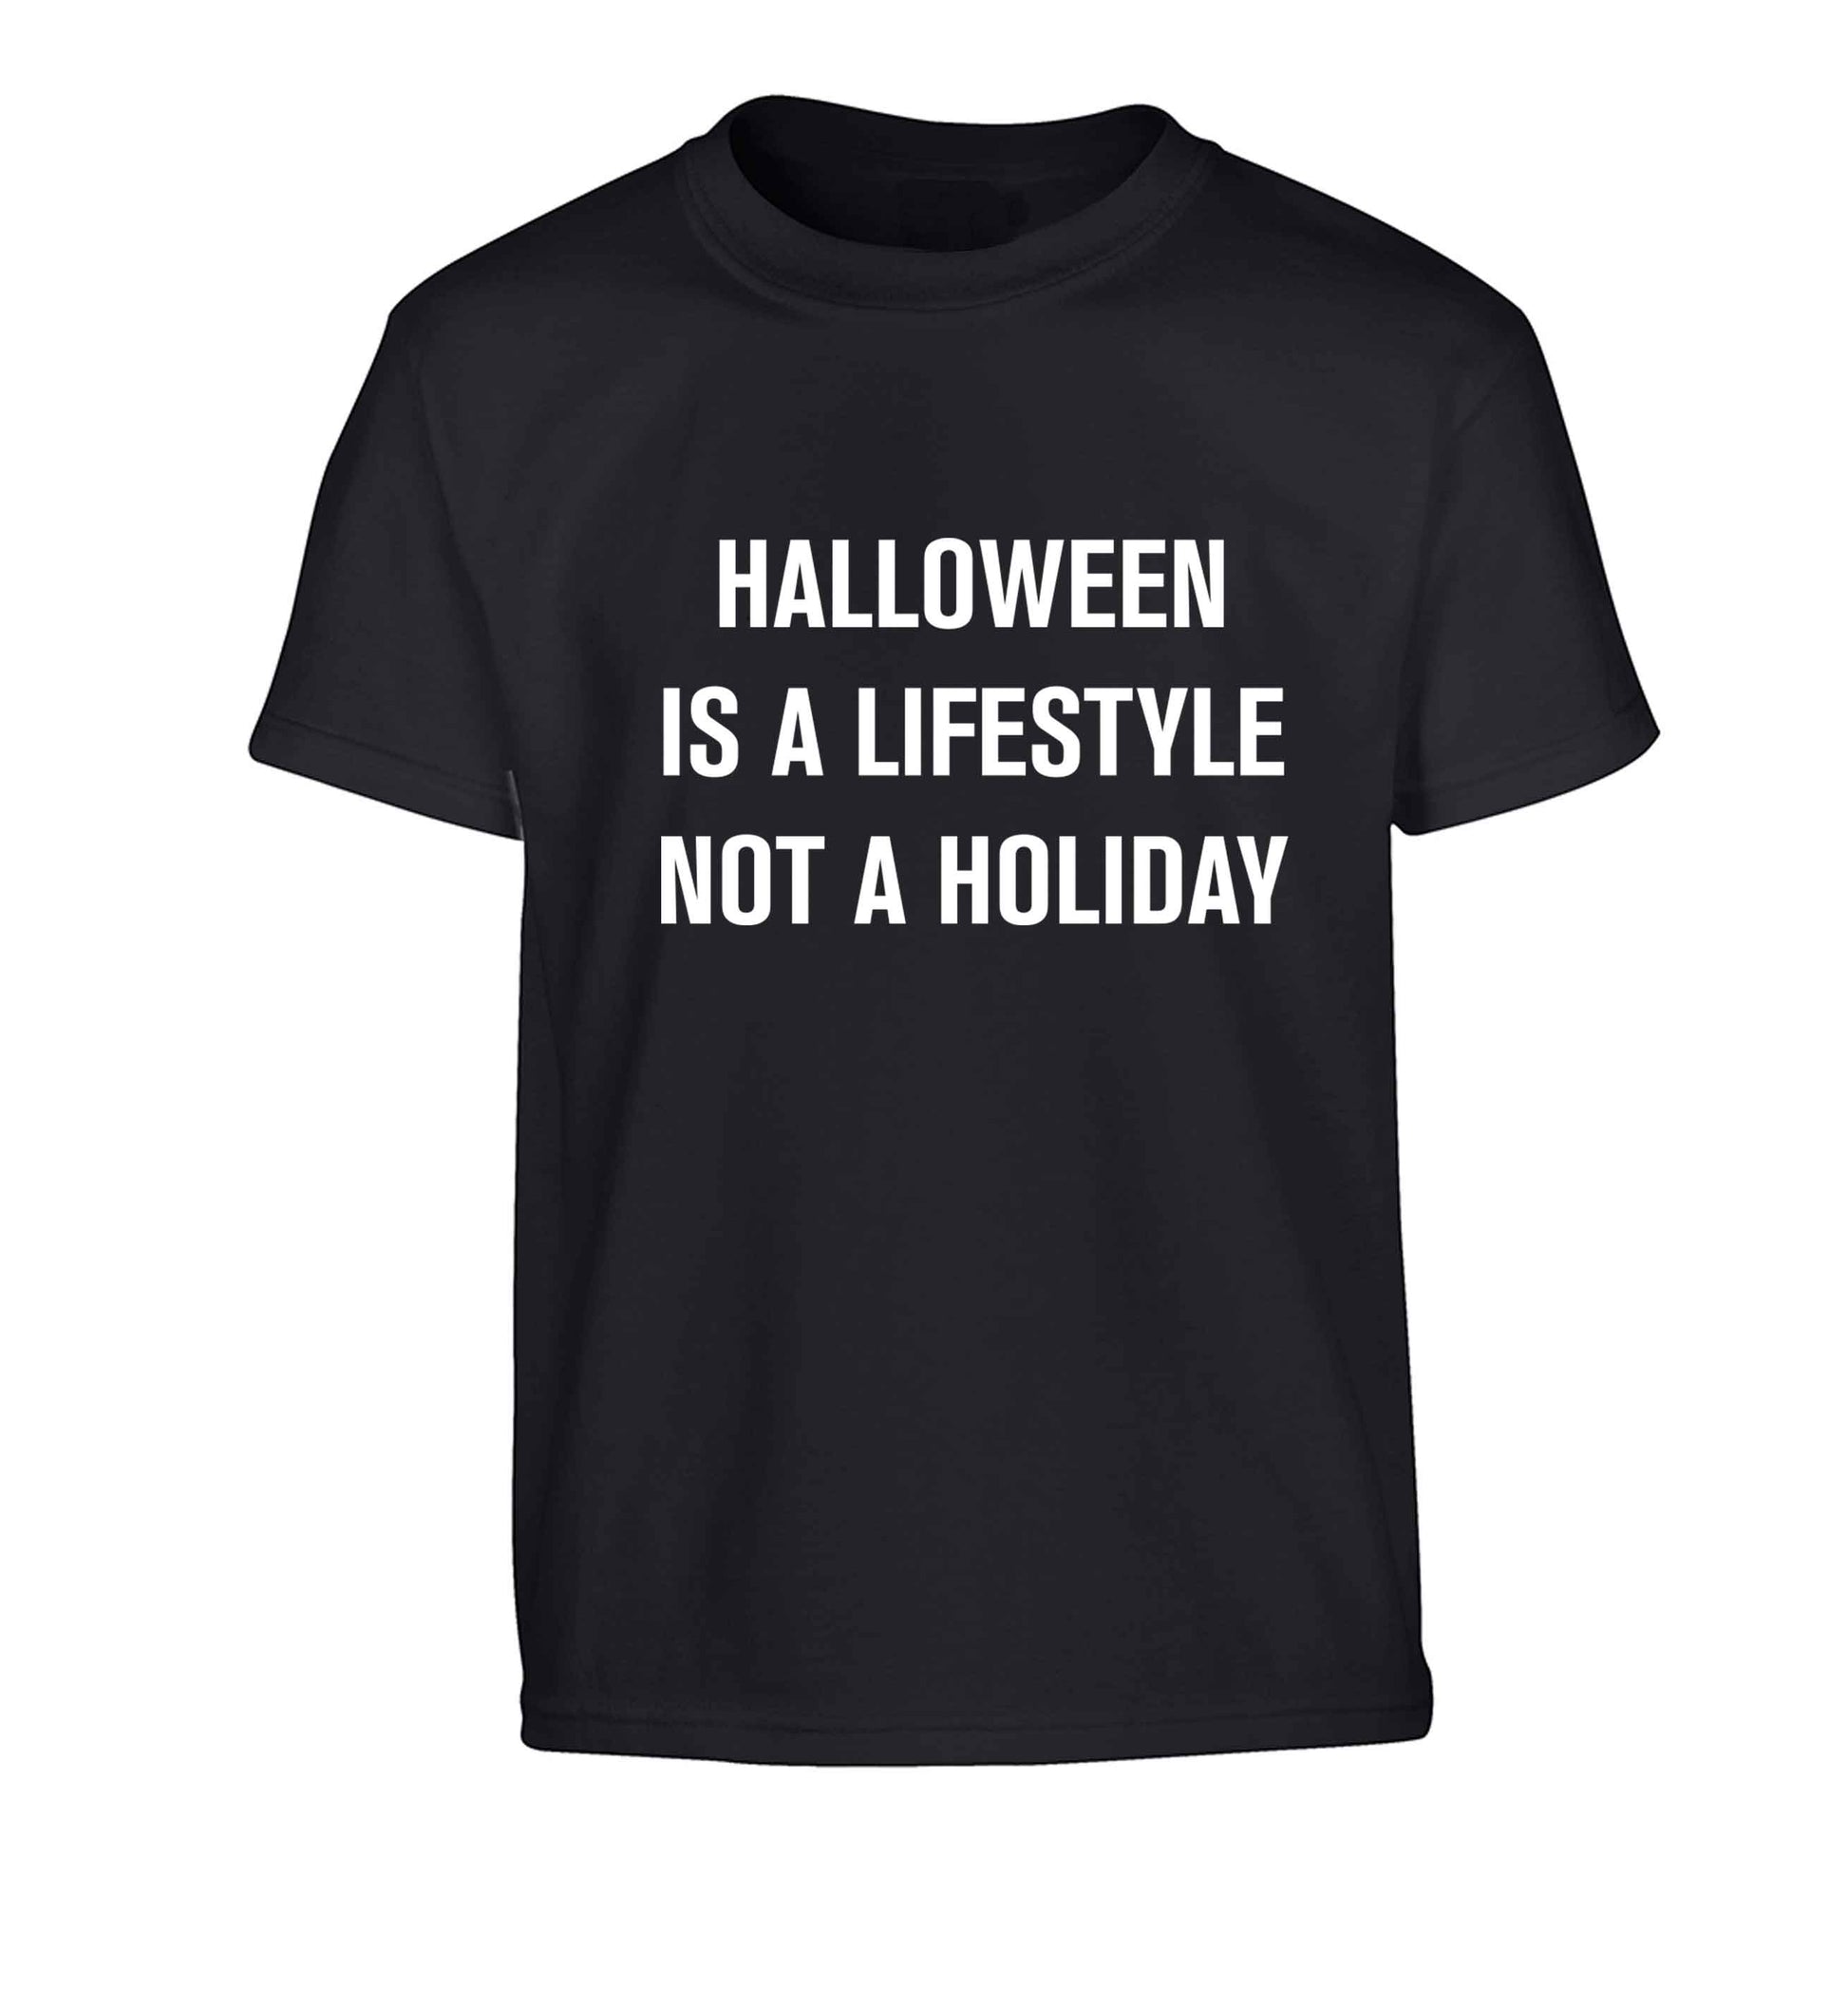 Halloween is a lifestyle not a holiday Children's black Tshirt 12-13 Years